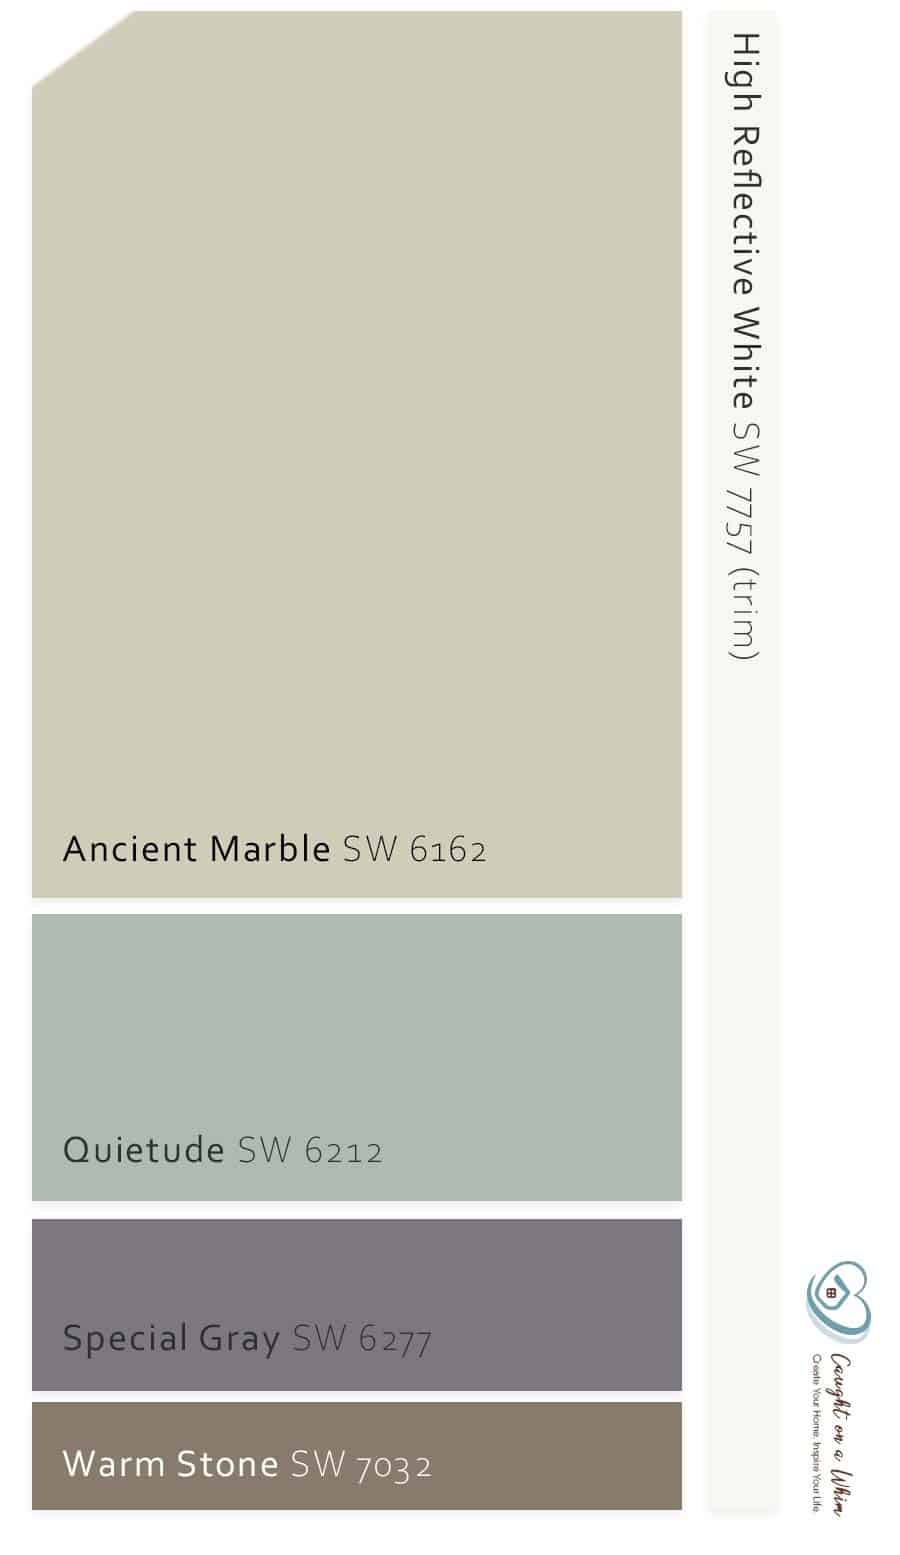 Sherwin Williams Ancient Marble Review - The Only Gray-Green Your Home ...